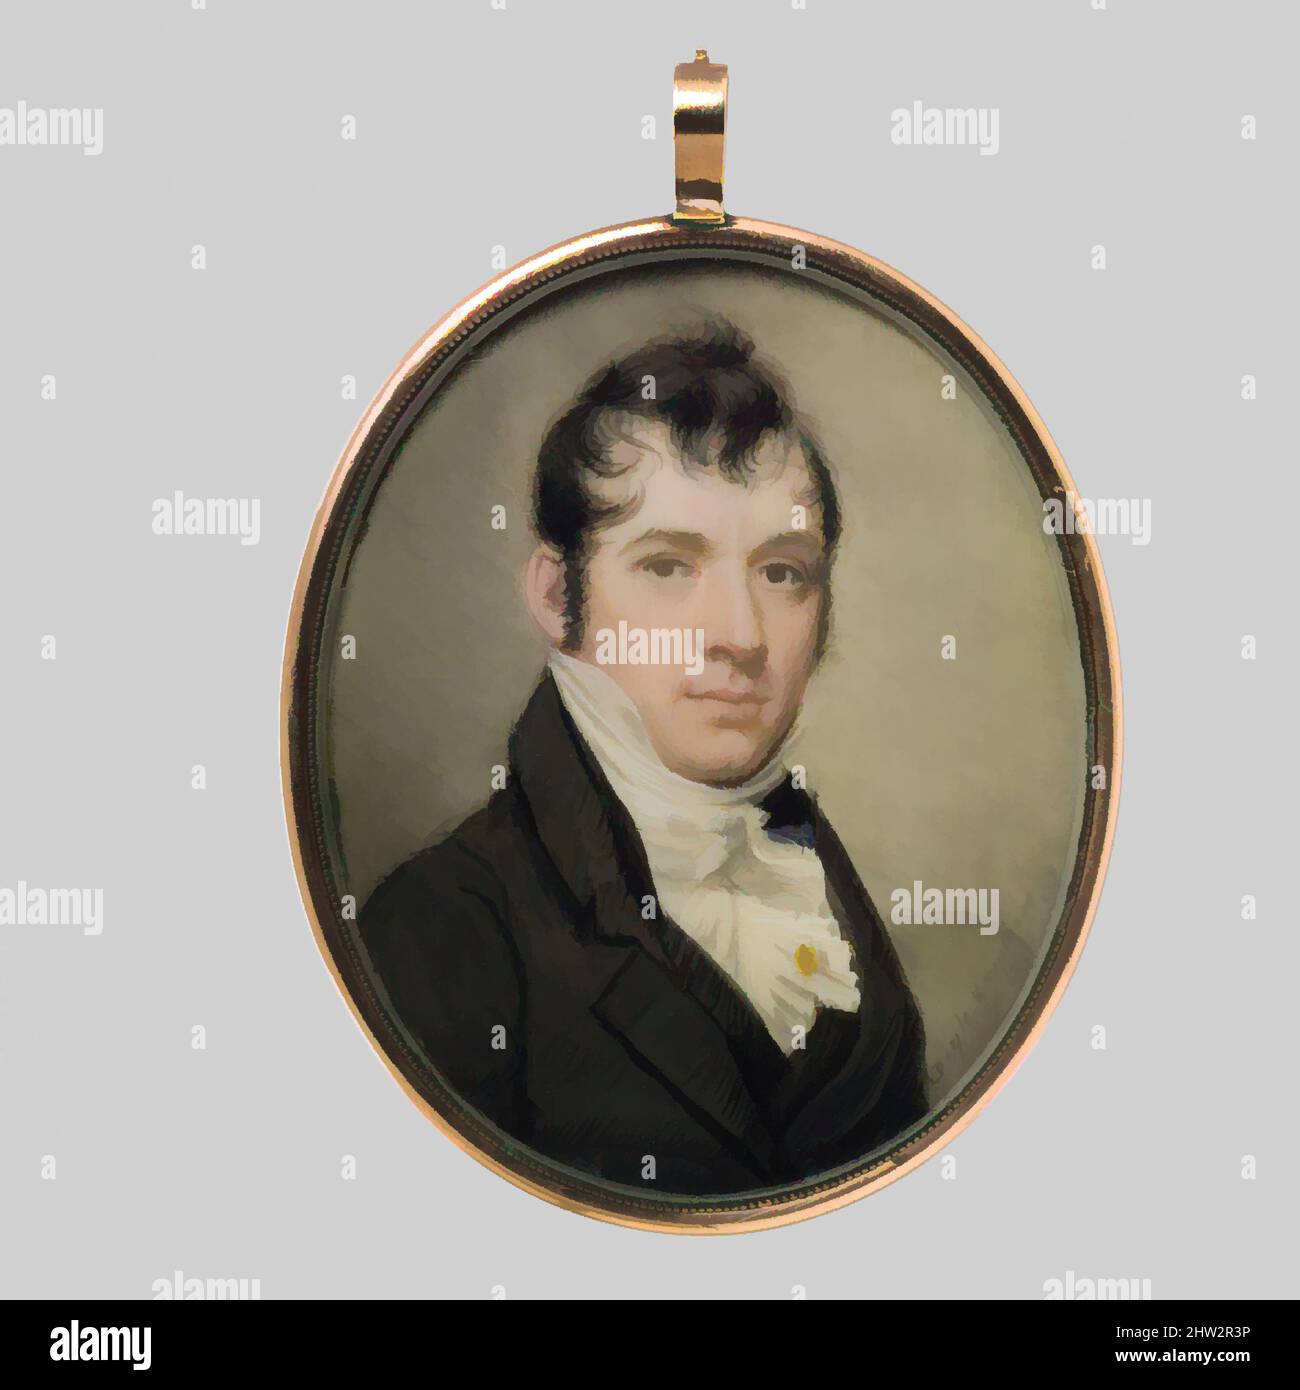 Art inspired by Portrait of a Gentleman, 1810, Watercolor on ivory, 3 x 2 3/8 in. (7.6 x 6 cm), Paintings, William M. S. Doyle (American, Boston, Massachusetts 1769–1828 Boston, Massachusetts), Henry Williams (American, Boston, Massachusetts 1787–1830 Boston, Massachusetts, Classic works modernized by Artotop with a splash of modernity. Shapes, color and value, eye-catching visual impact on art. Emotions through freedom of artworks in a contemporary way. A timeless message pursuing a wildly creative new direction. Artists turning to the digital medium and creating the Artotop NFT Stock Photo